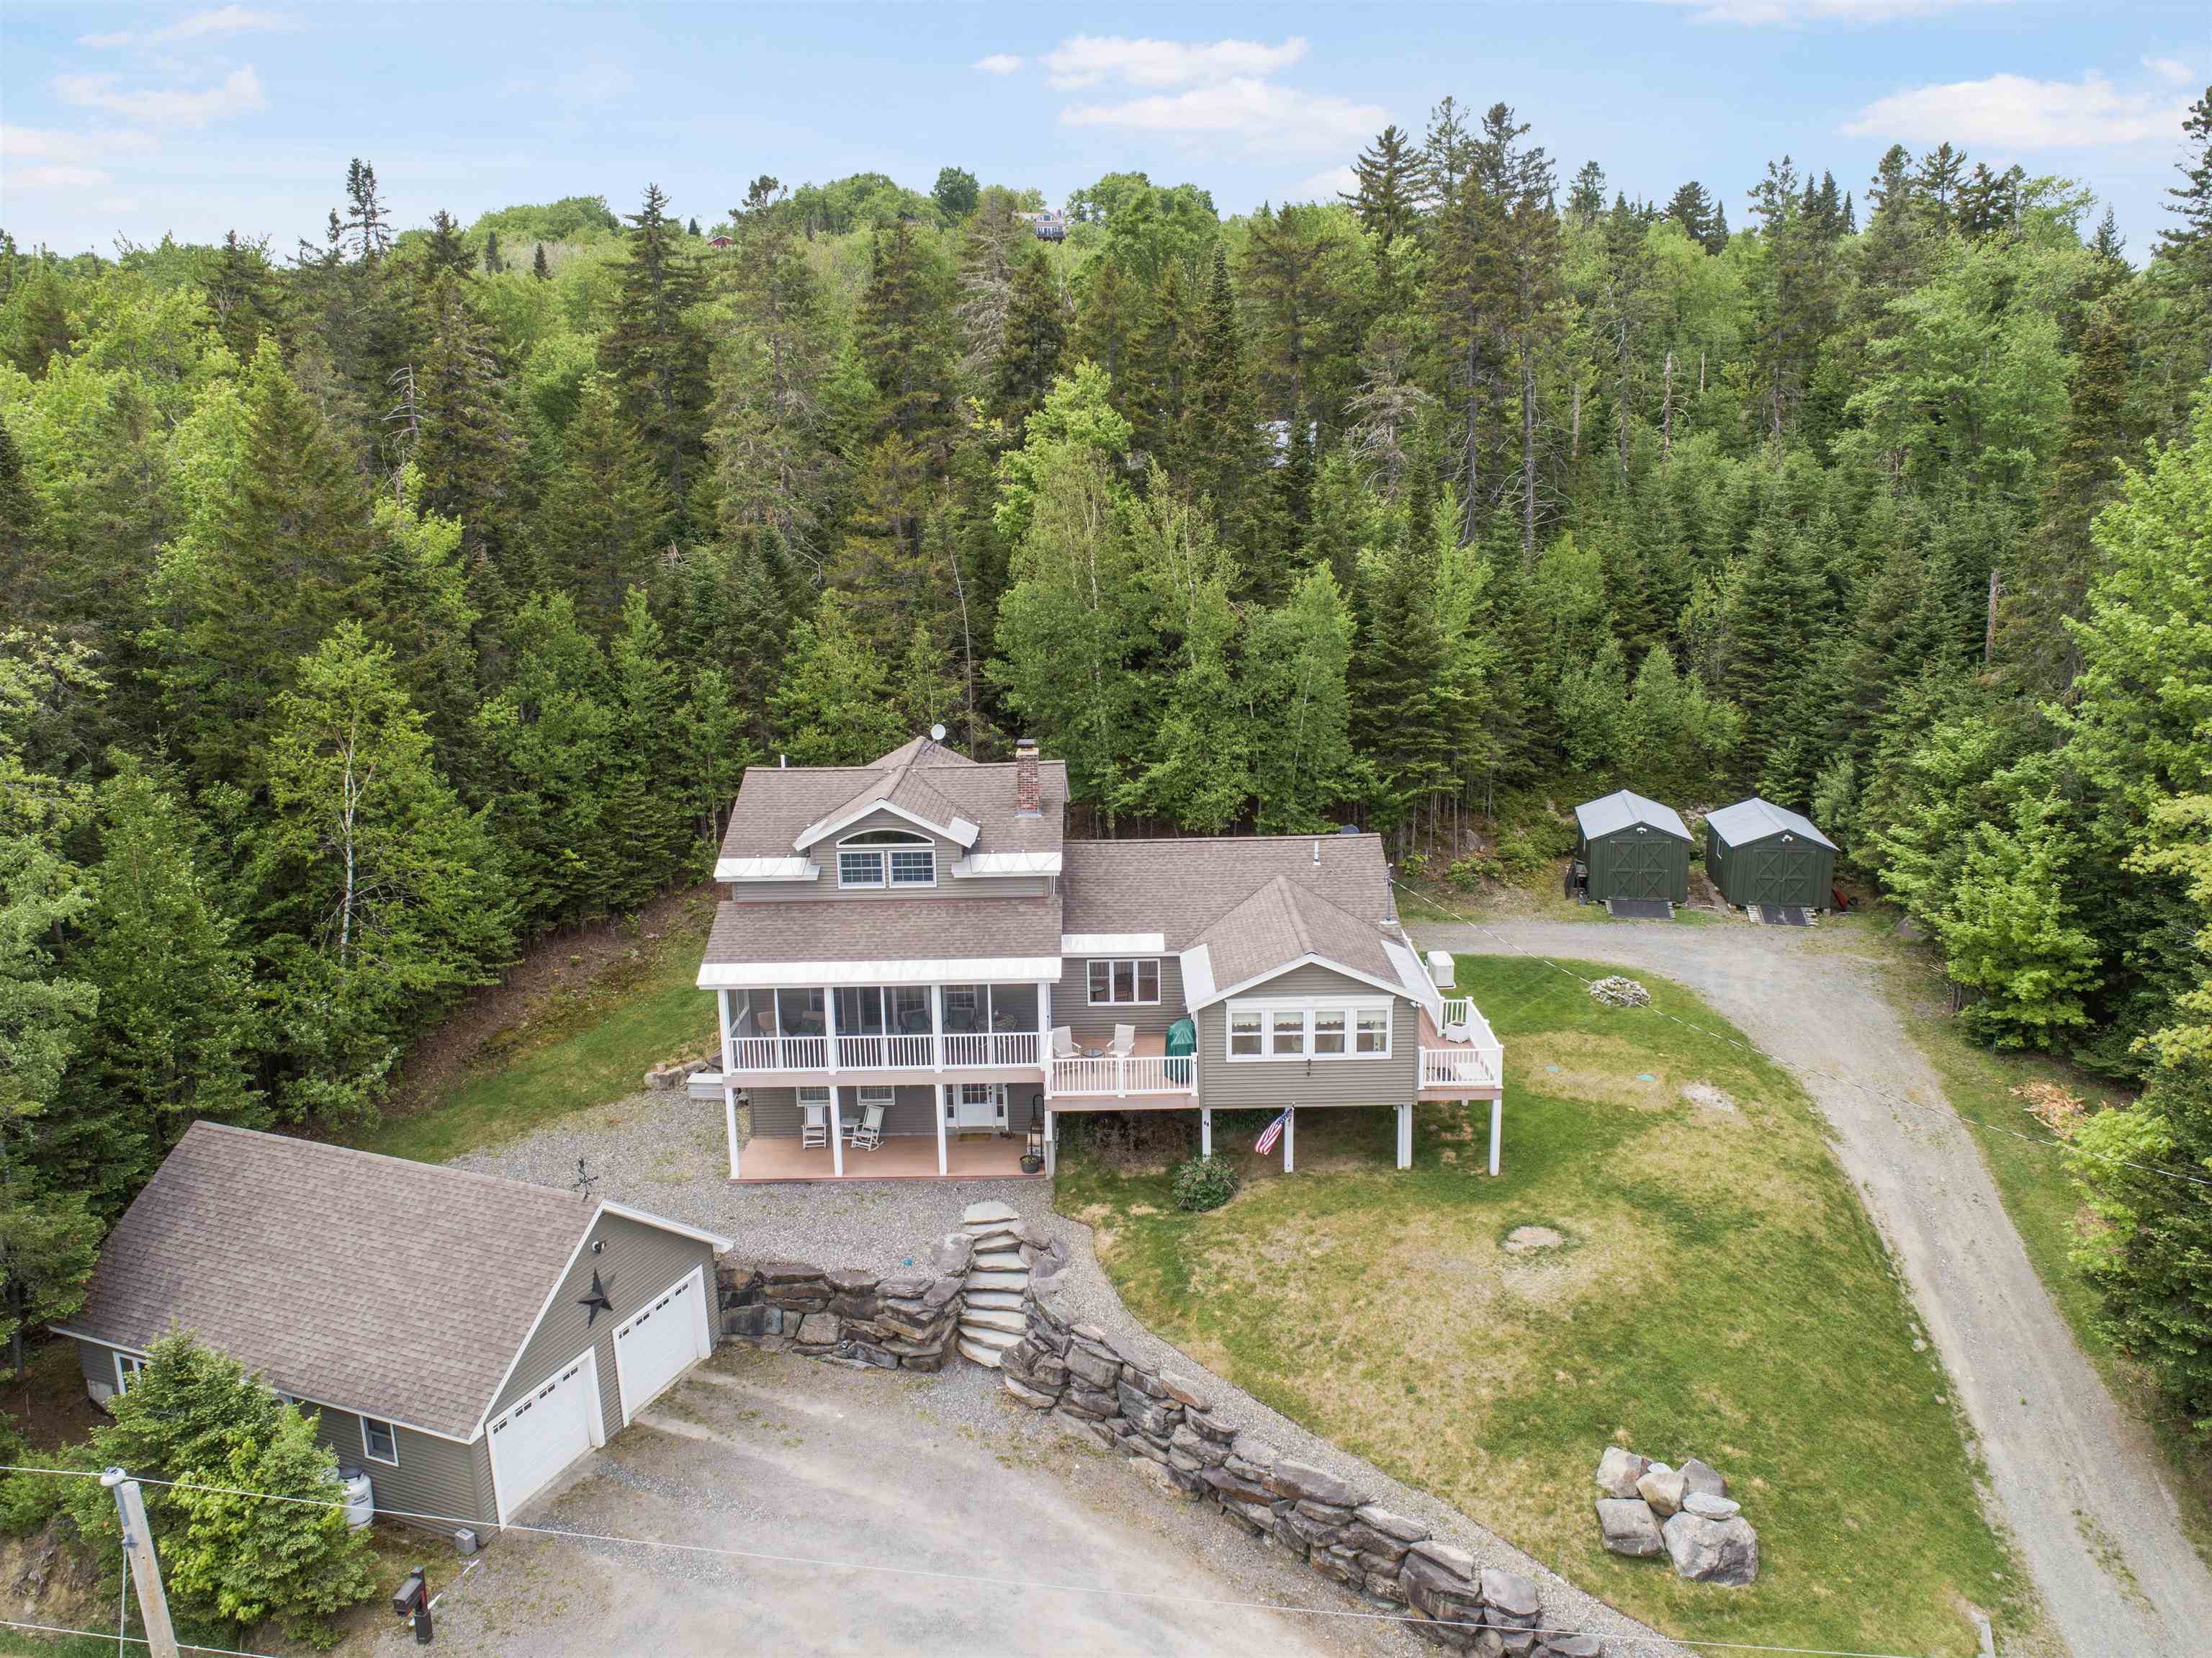 68 Stewart Young Road, Pittsburg, NH 